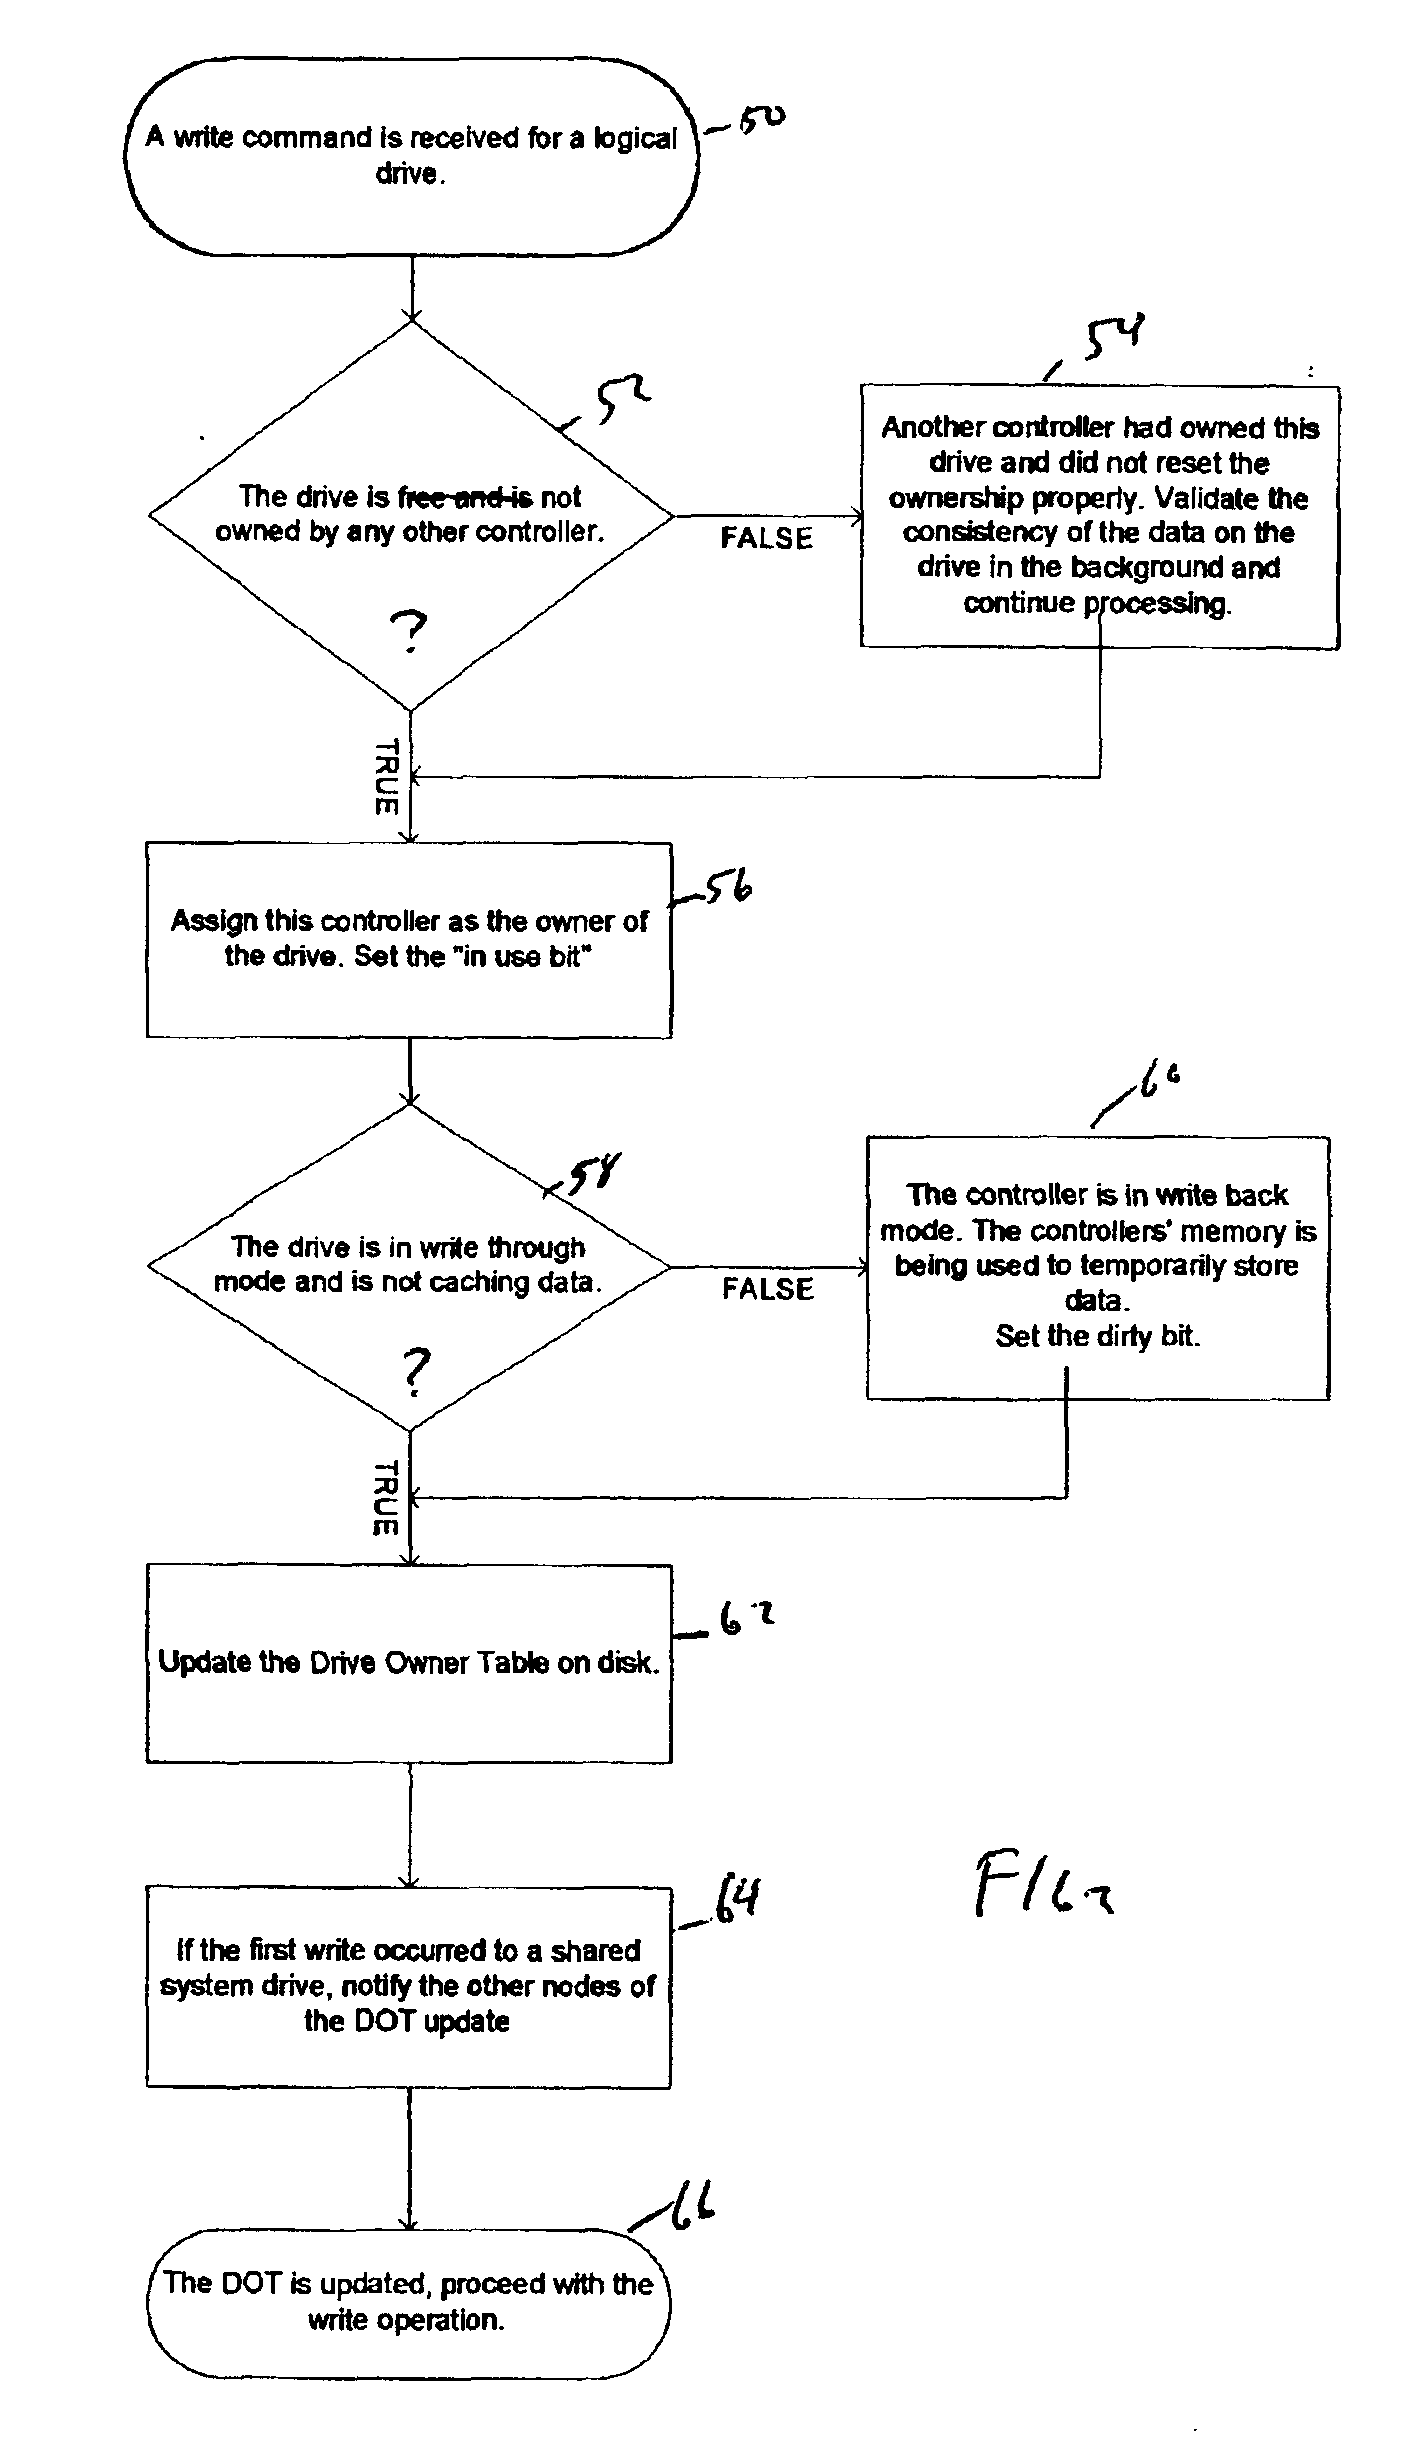 System and method for detecting data integrity problems on a data storage device